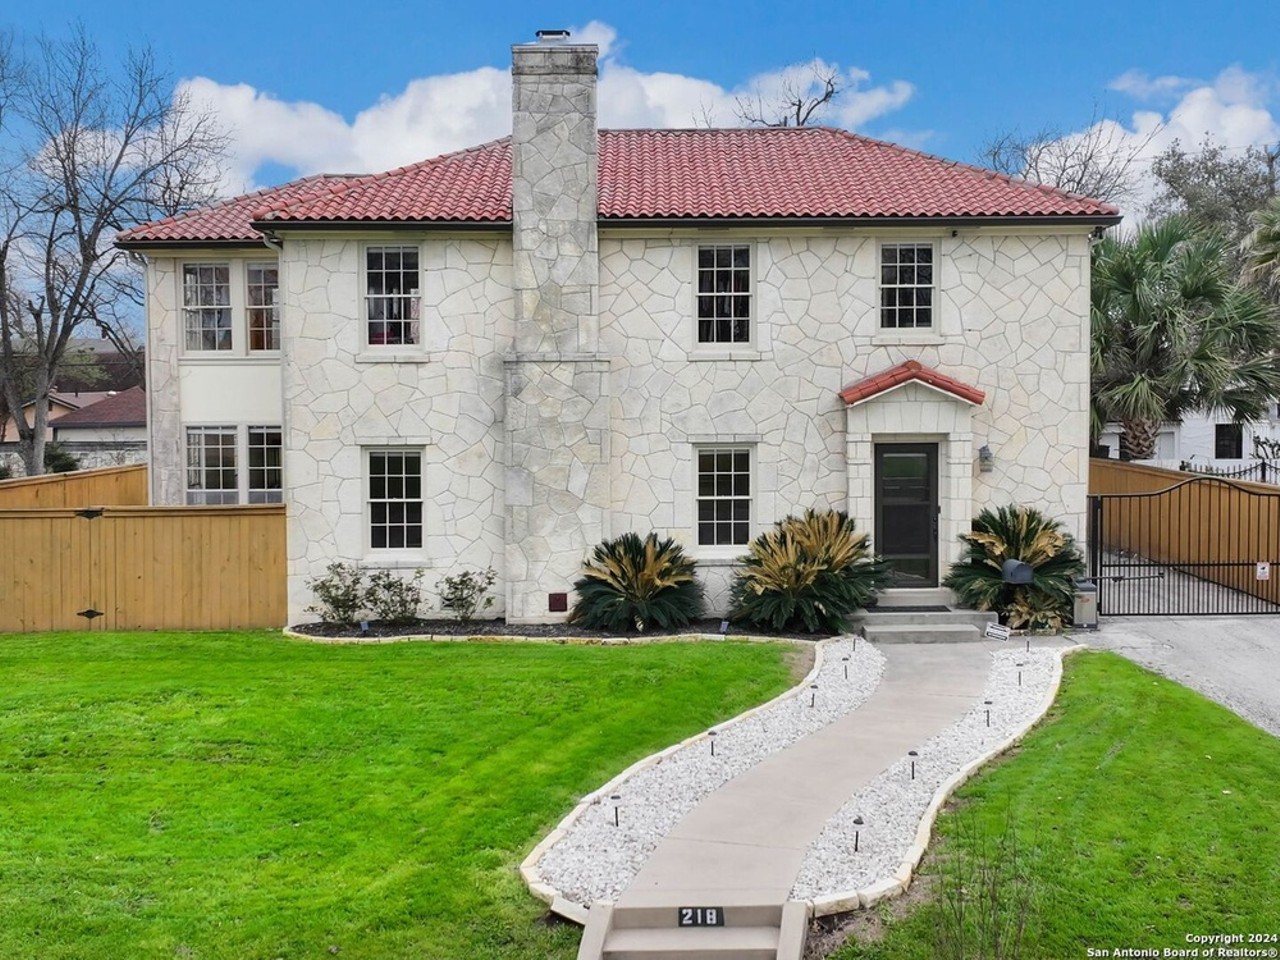 This historic home in San Antonio's Monticello Park is for sale after a two-year makeover